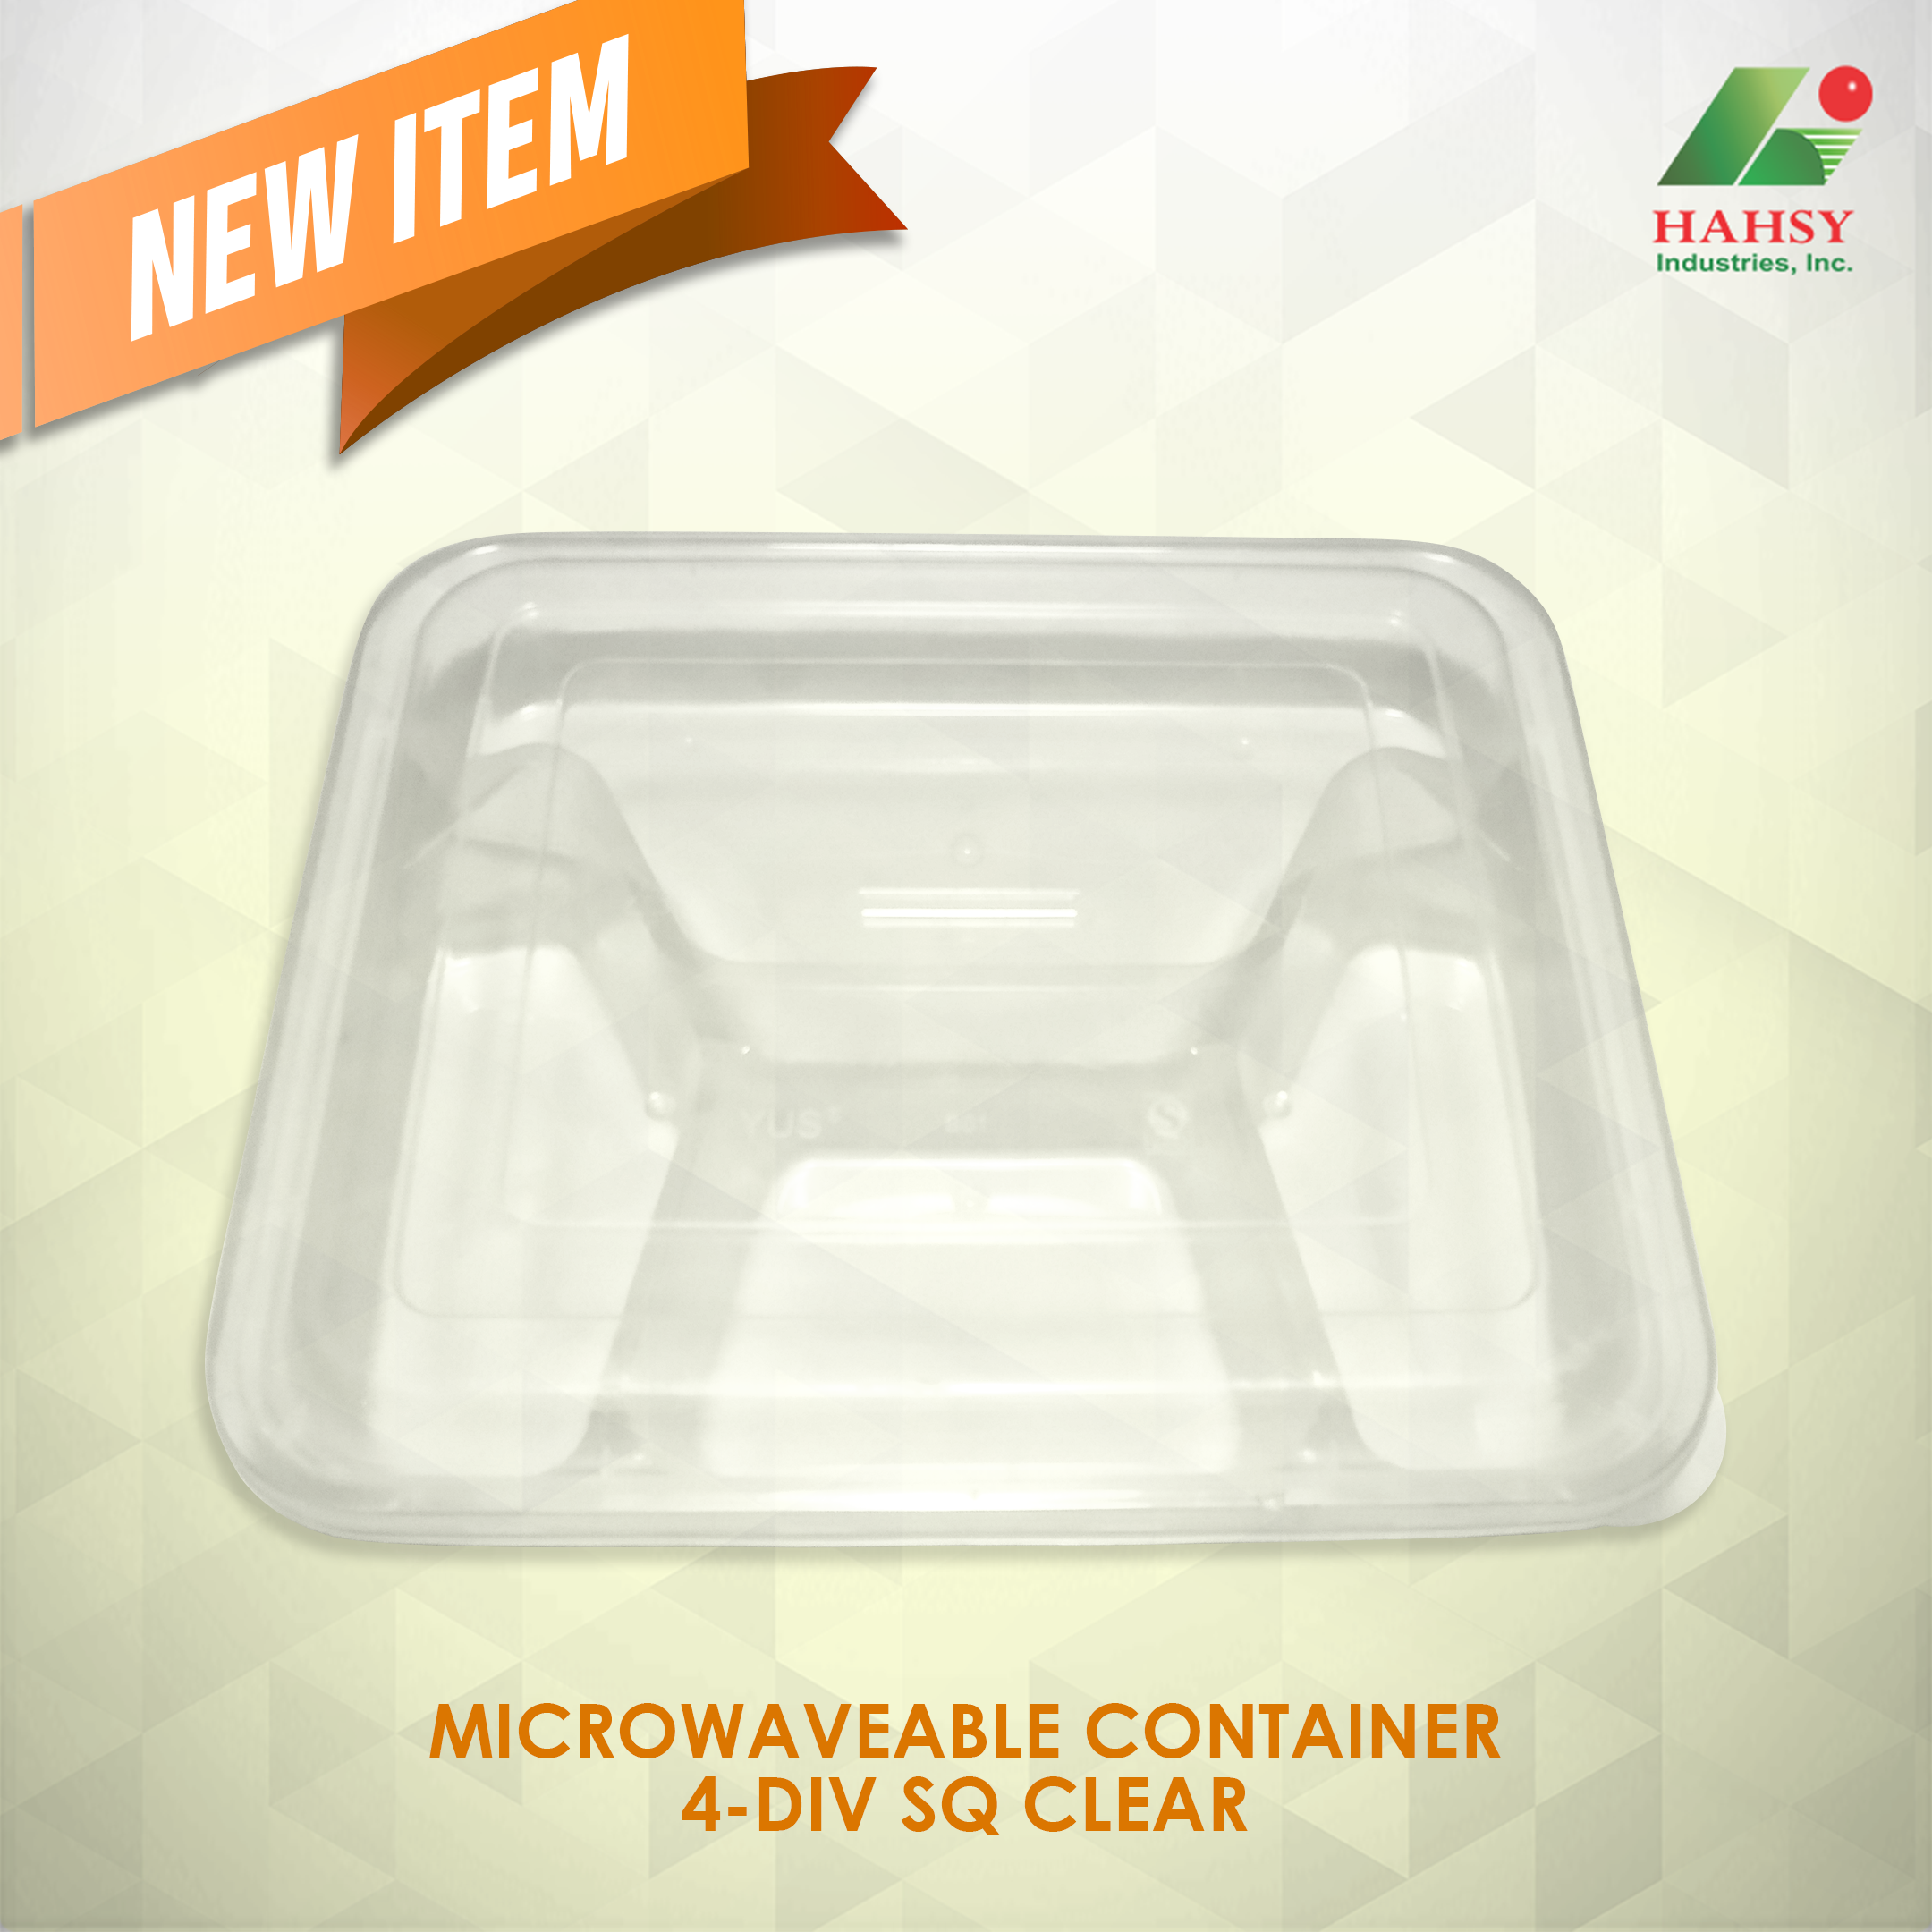 https://www.hahsyindustries.com/assets/images/microwaveable-container-4-div-sq-clear.png